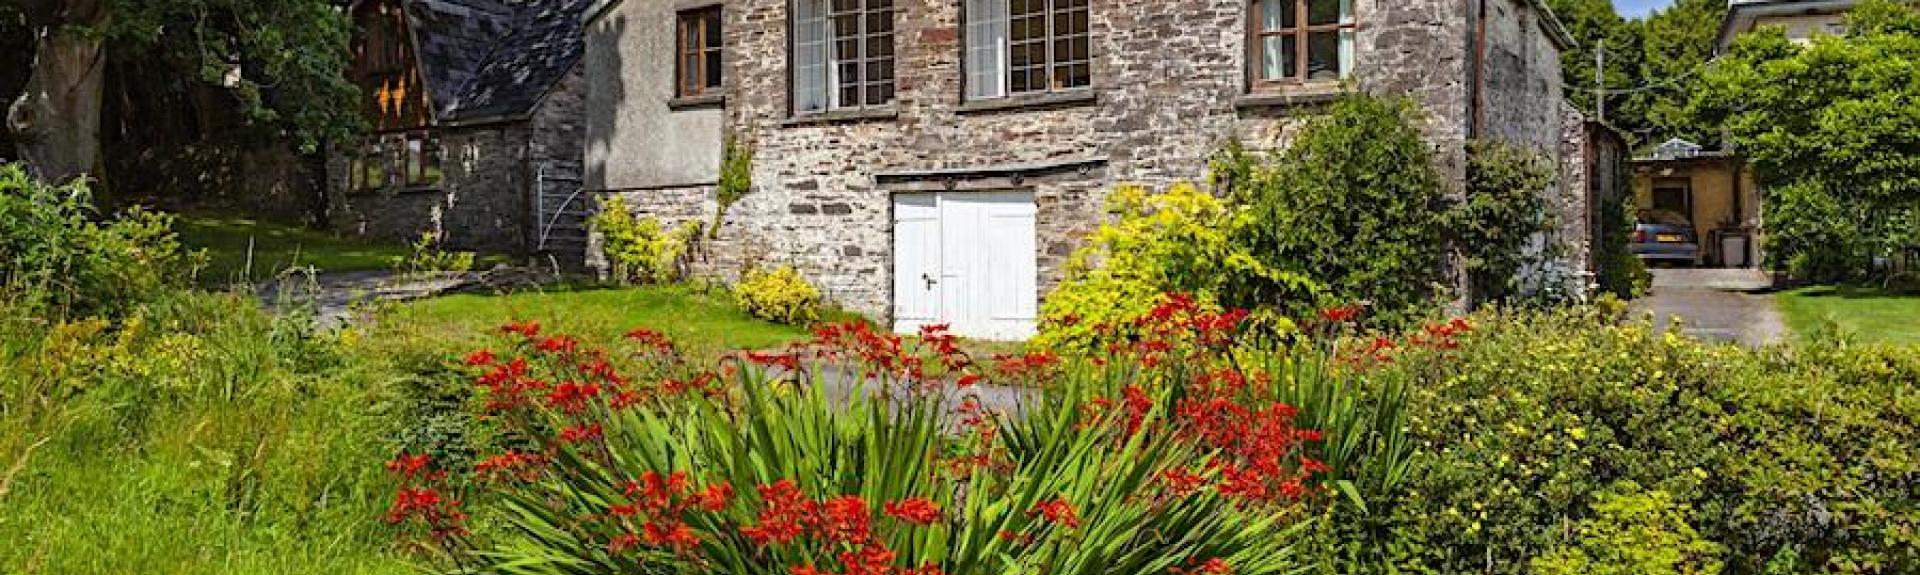 Exterior or a stone-built barn conversion surrounded by a flower-filled garden